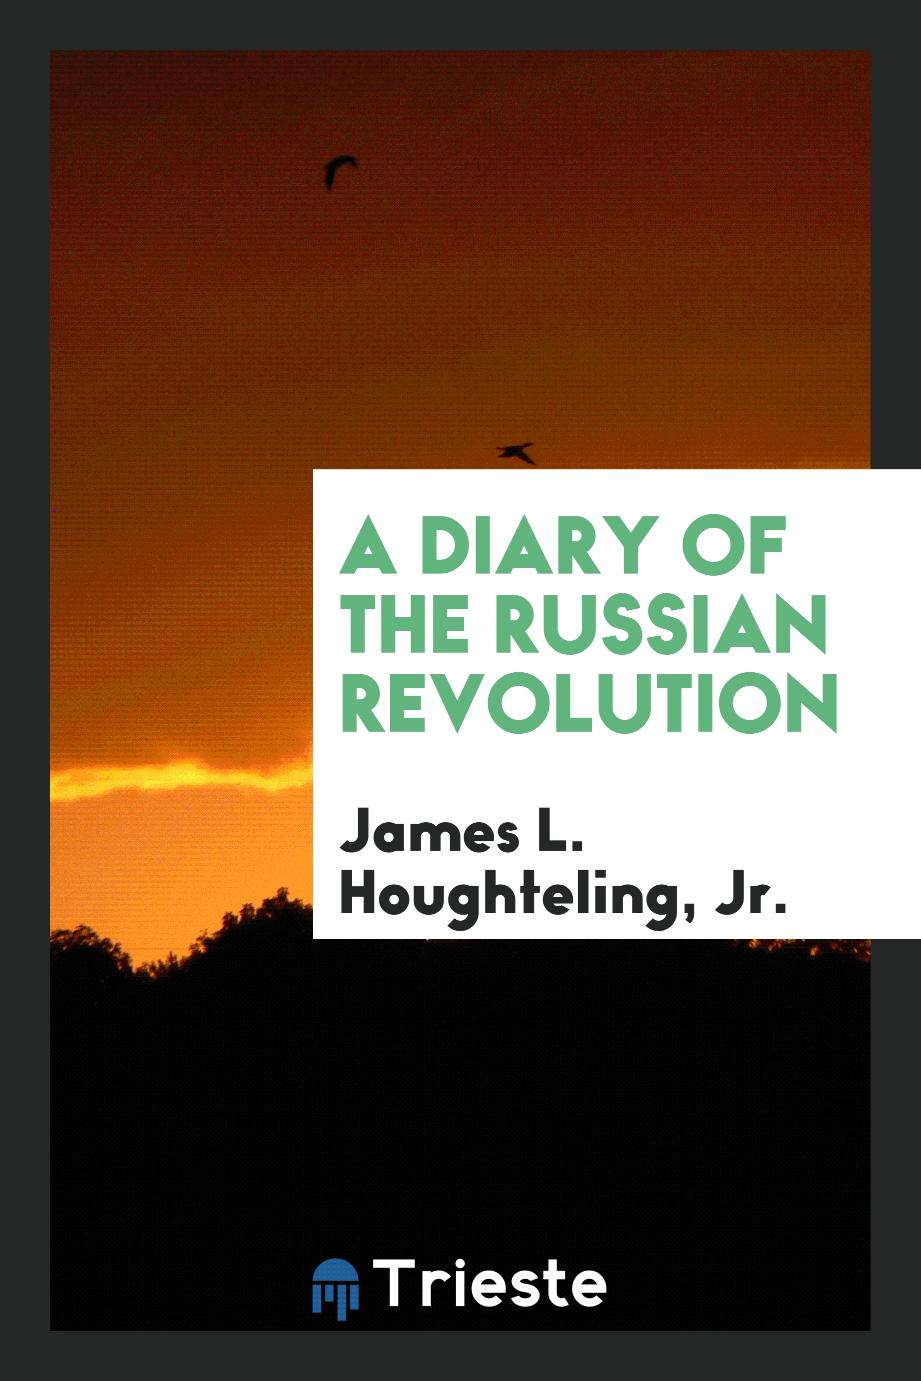 A Diary of the Russian Revolution